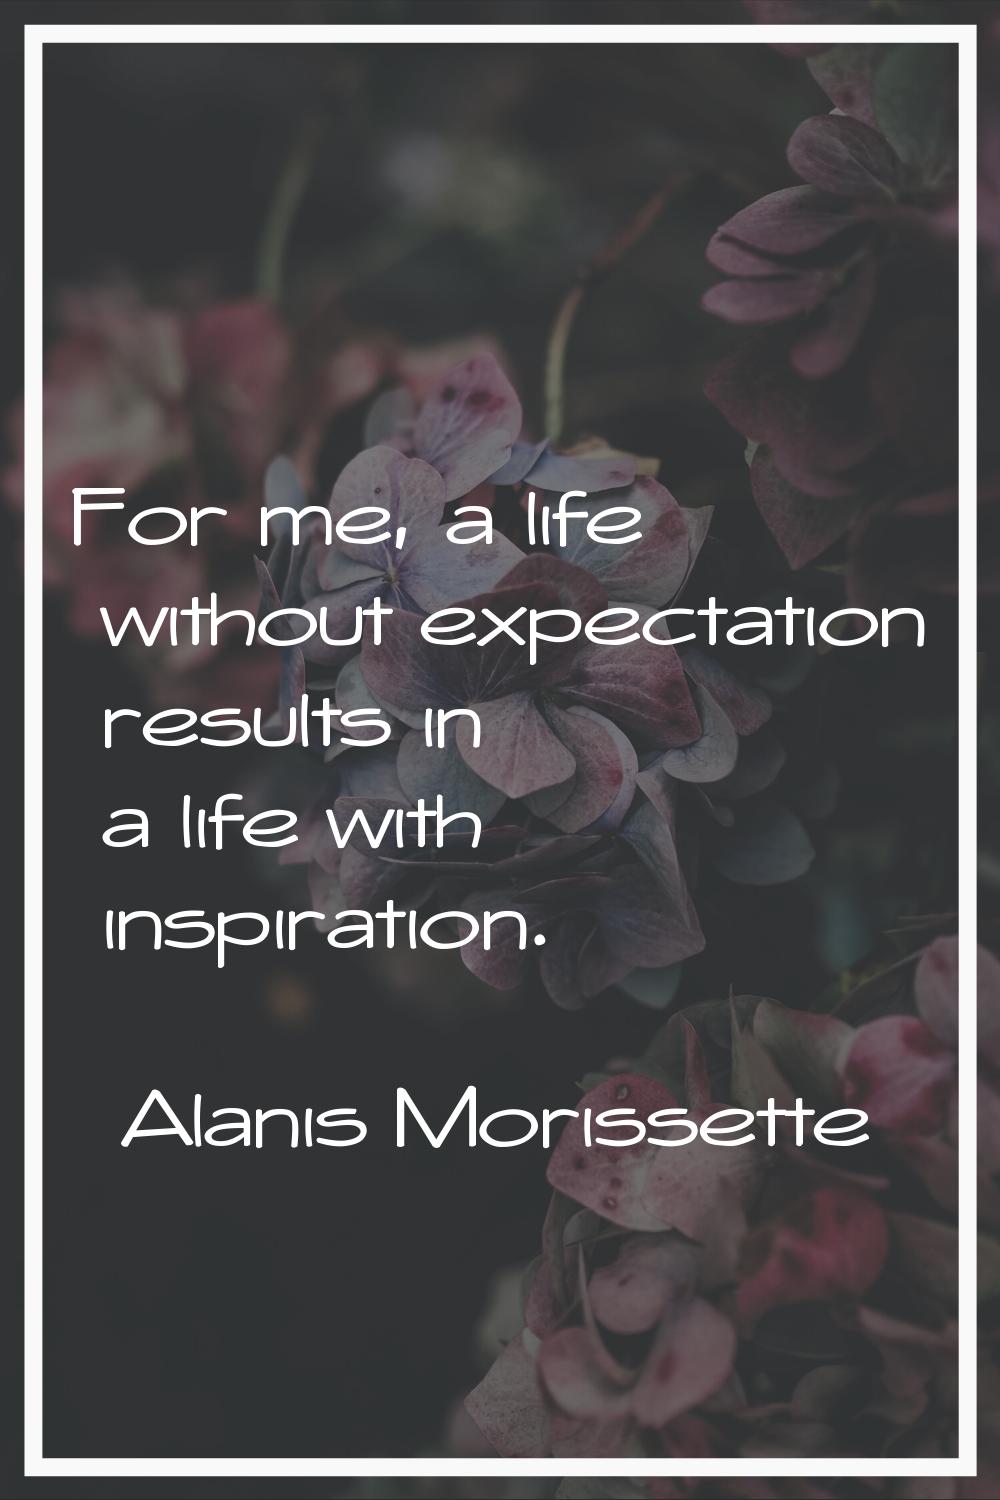 For me, a life without expectation results in a life with inspiration.